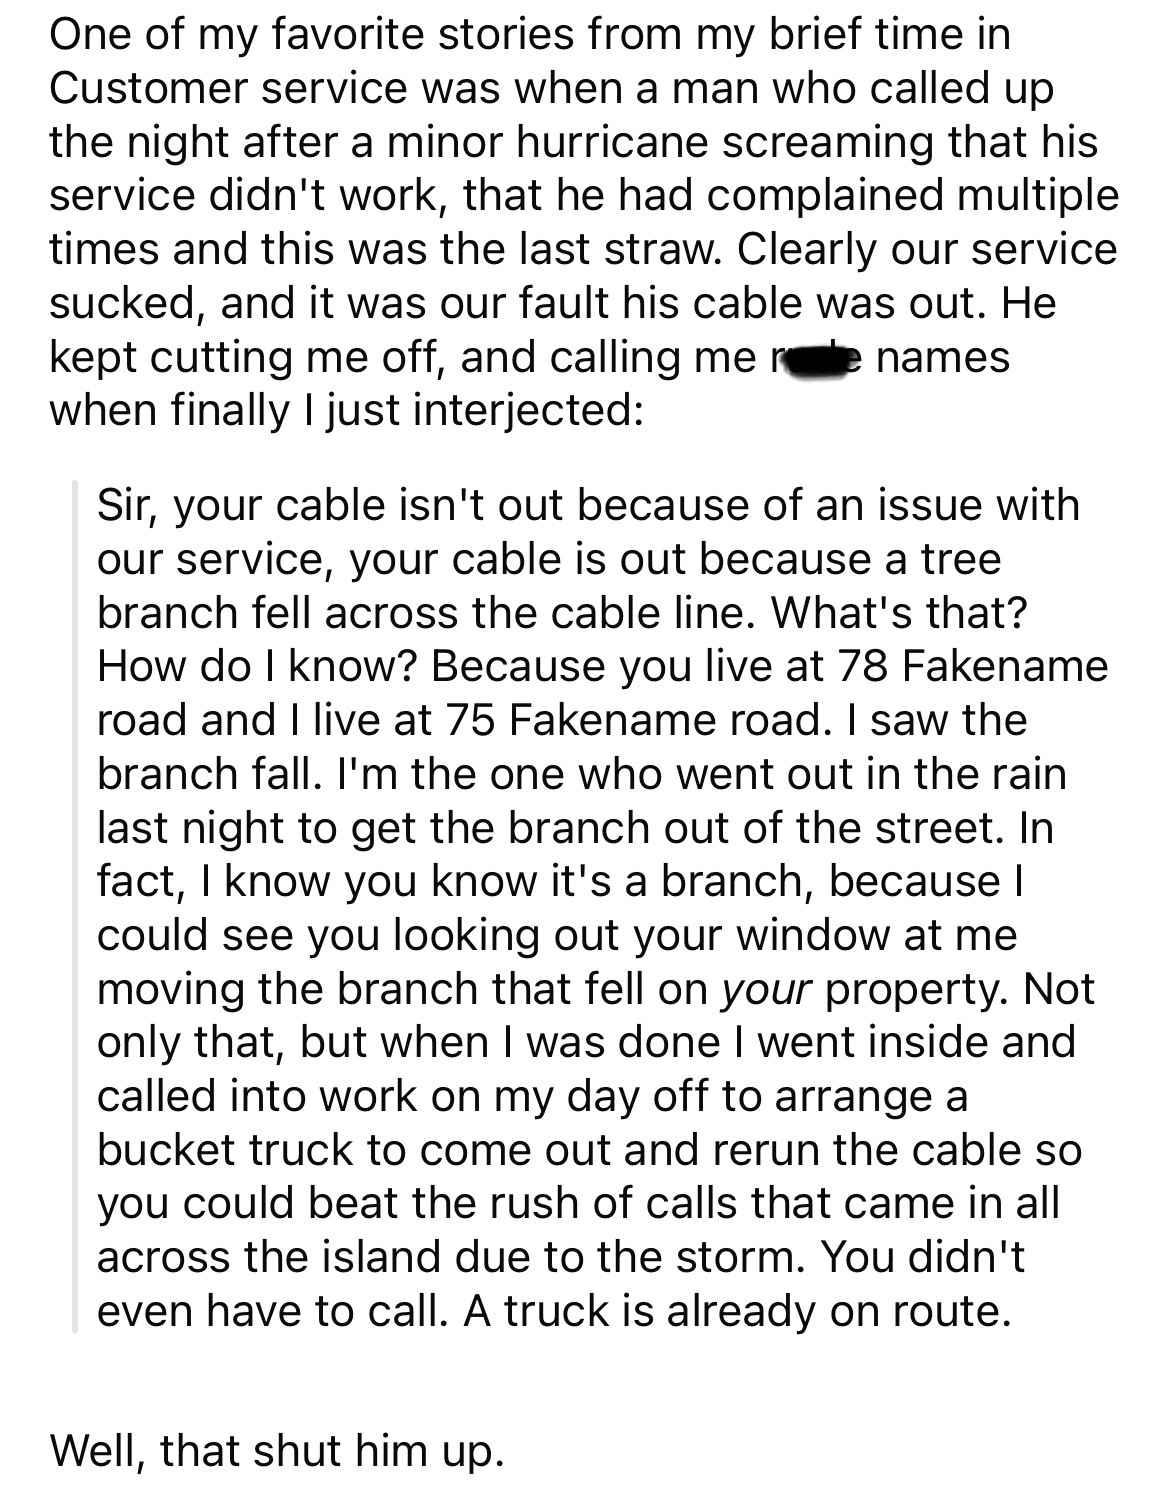 document - One of my favorite stories from my brief time in Customer service was when a man who called up the night after a minor hurricane screaming that his service didn't work, that he had complained multiple times and this was the last straw. Clearly 